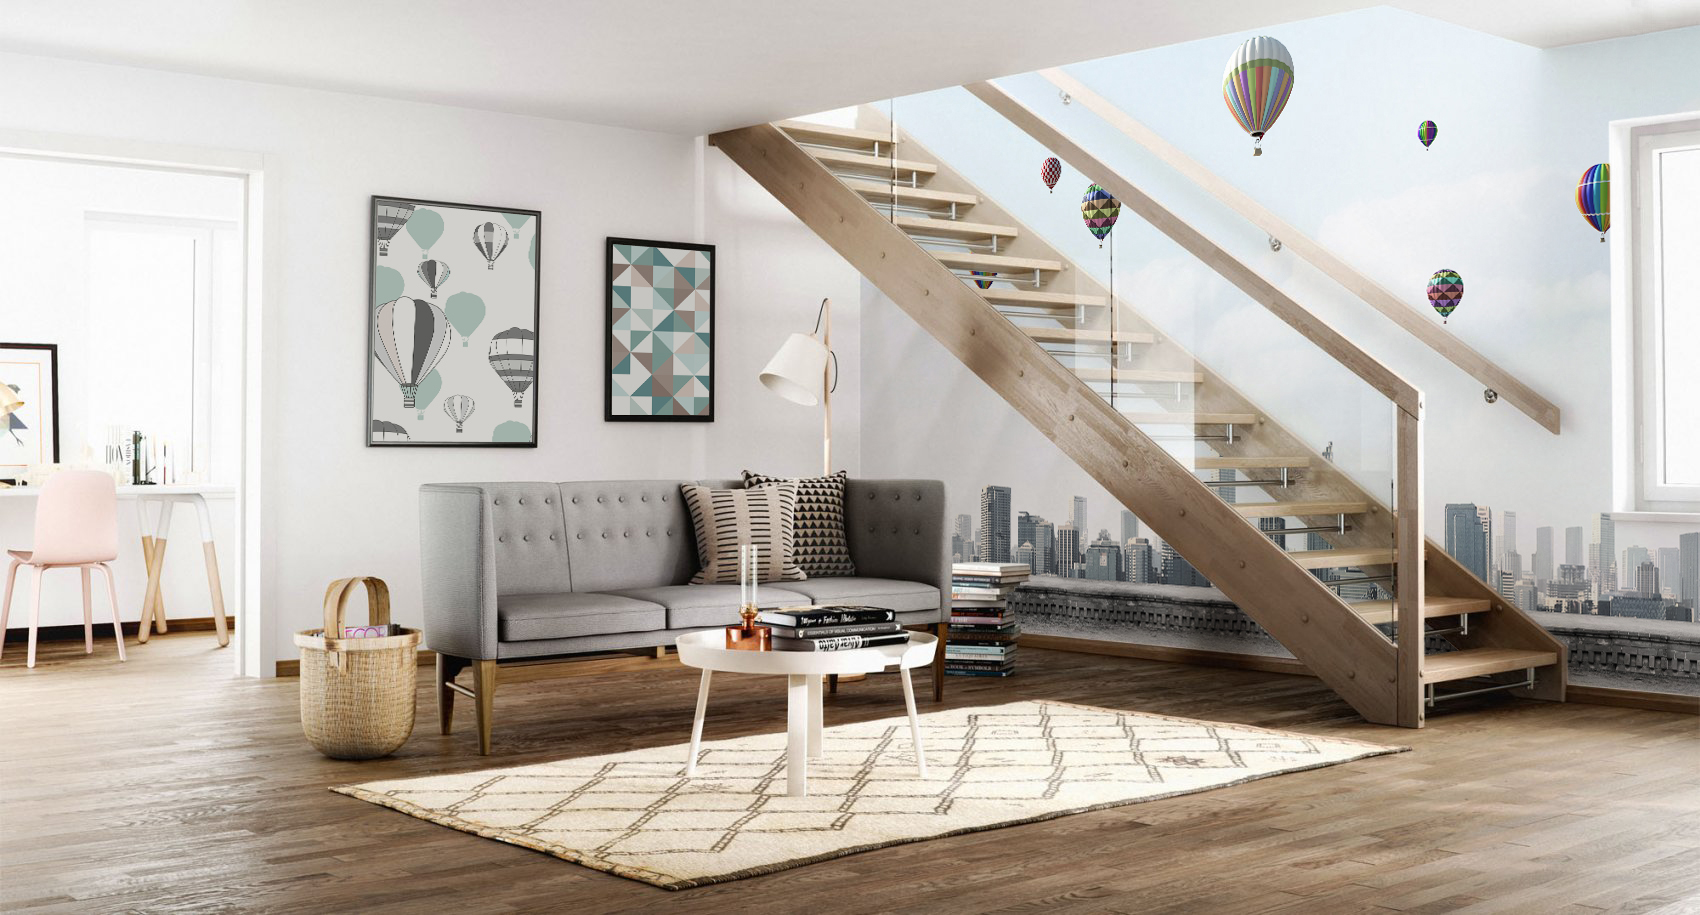 Hanging Balloons • Scandinavian - Living room - Architecture and buildings - Wall Murals - Posters